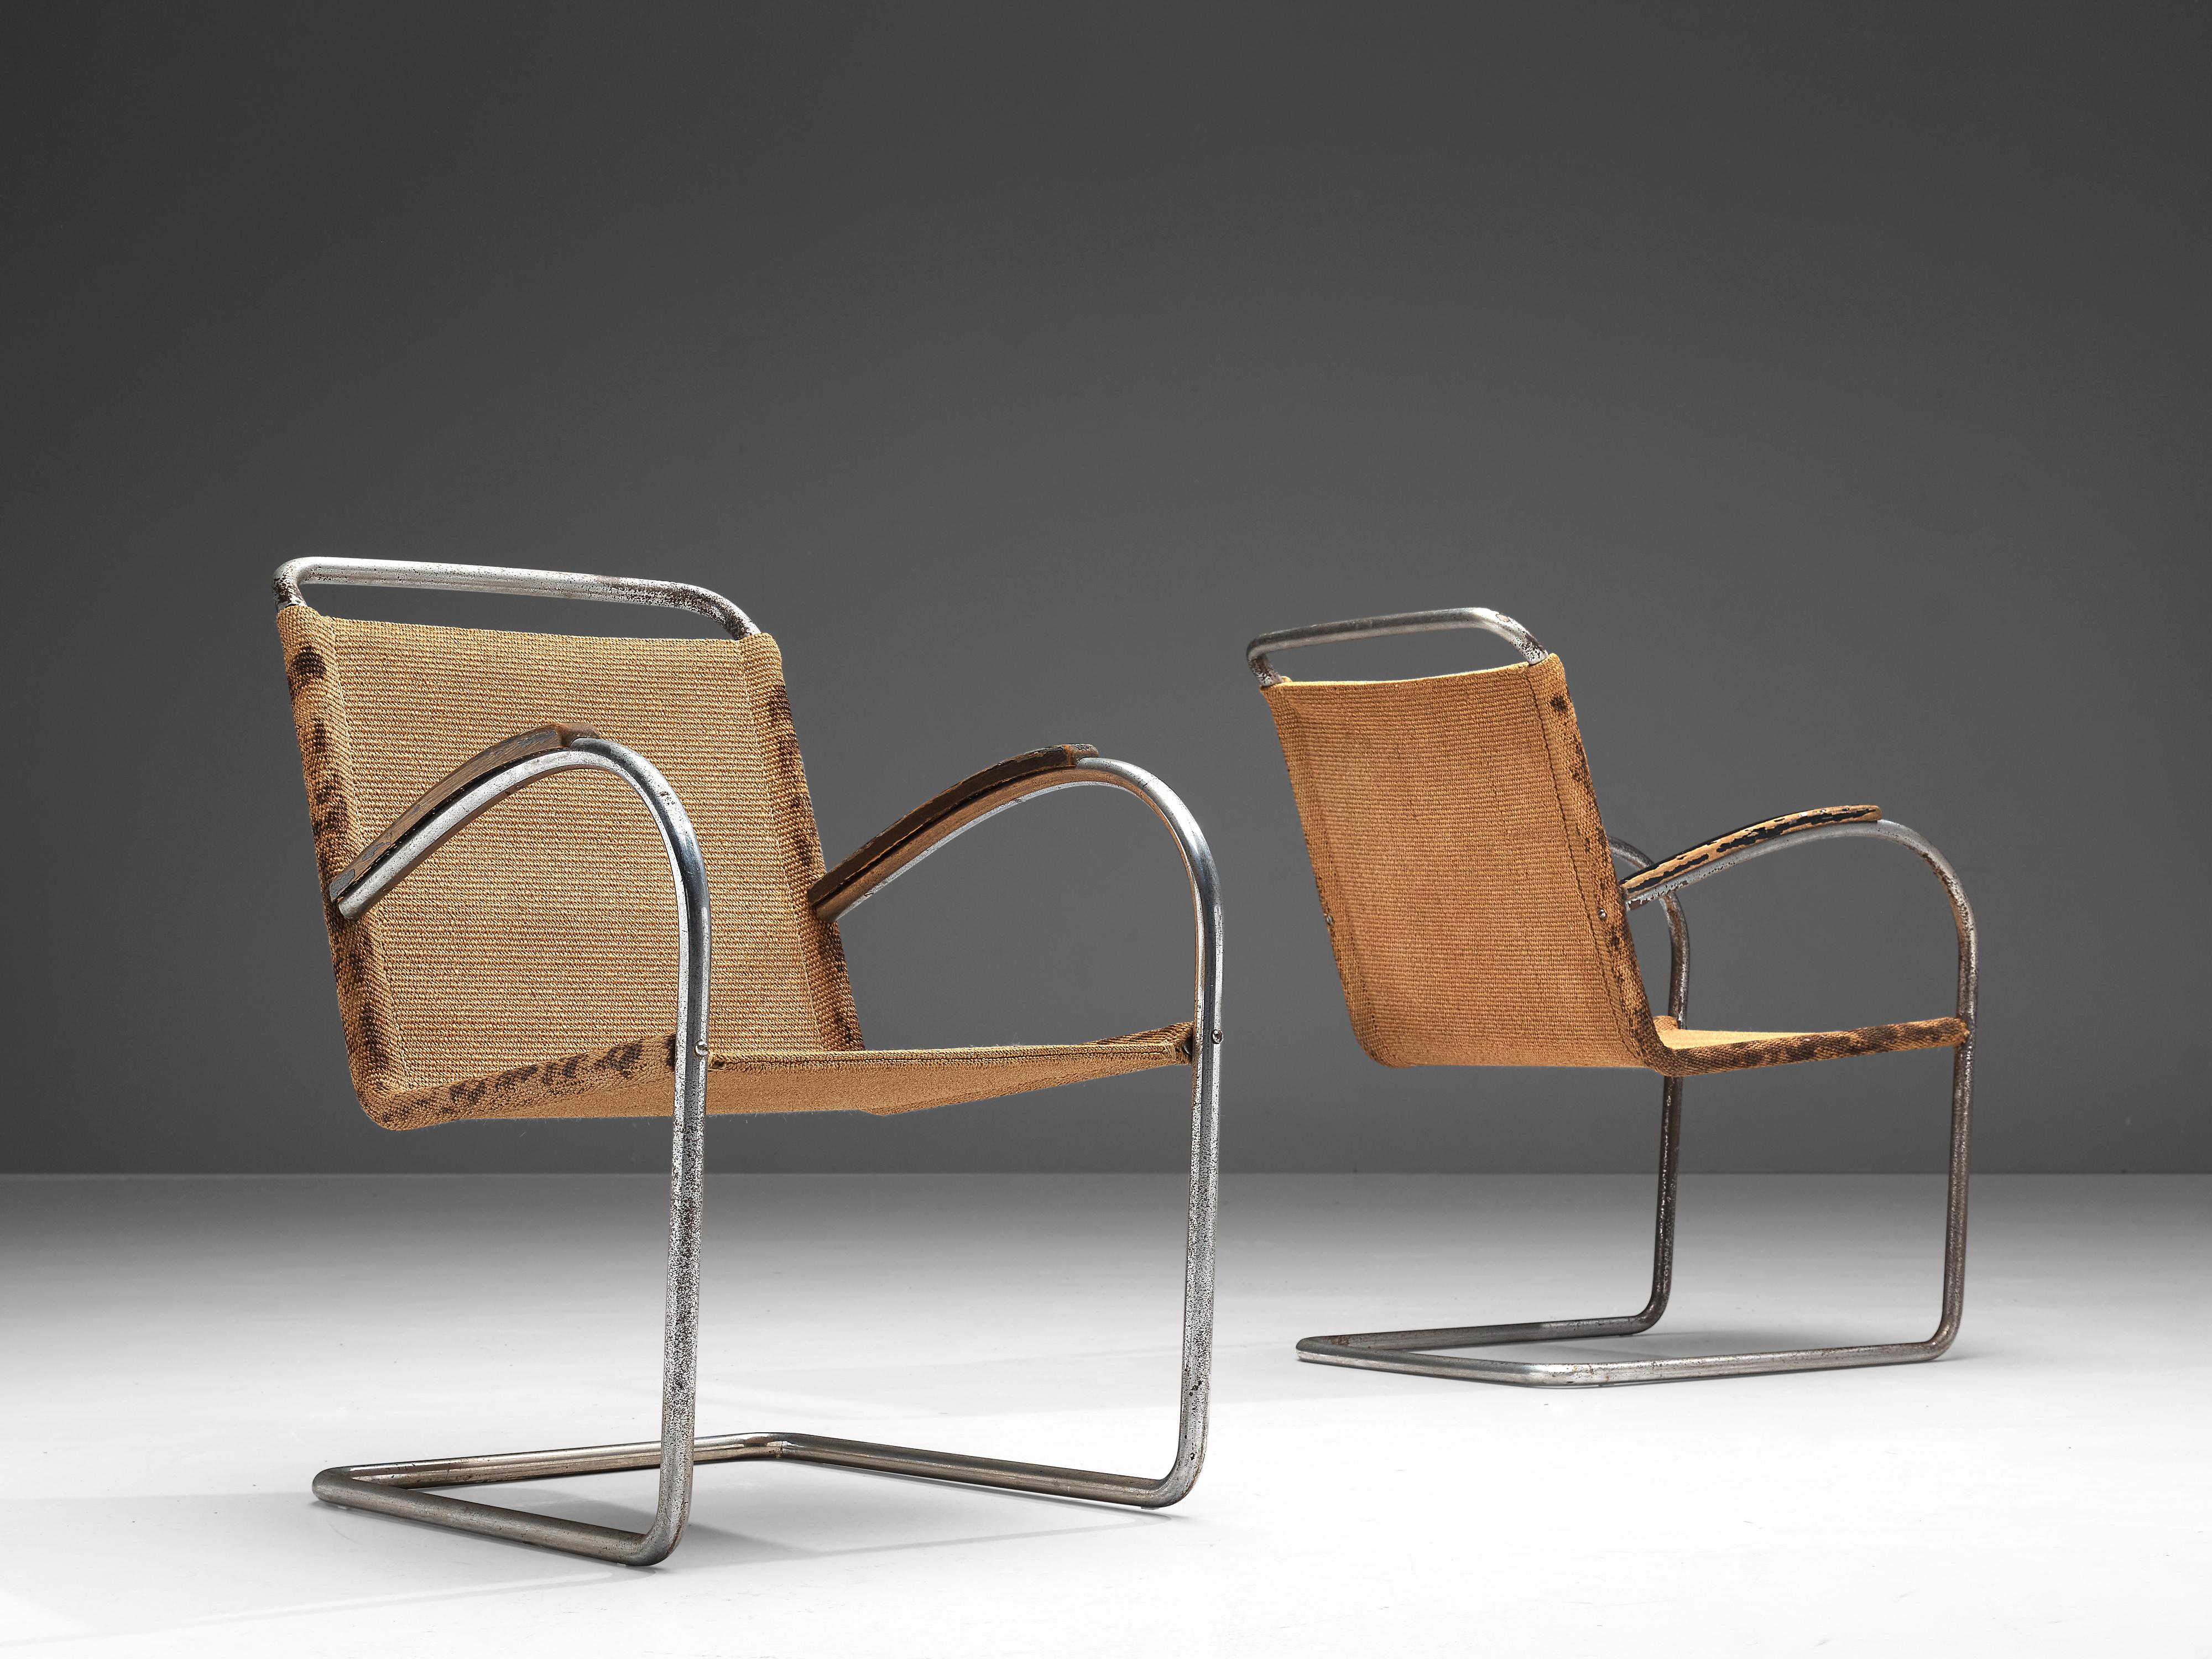 Bas van Pelt for E.M.S. Overschie, pair of armchairs, chrome-plated steel, sisal, lacquered wood, The Netherlands, 1930s.

These original comfortable chairs are made by the Dutch interior and furniture designer Bas van Pelt (1900-1945) and were